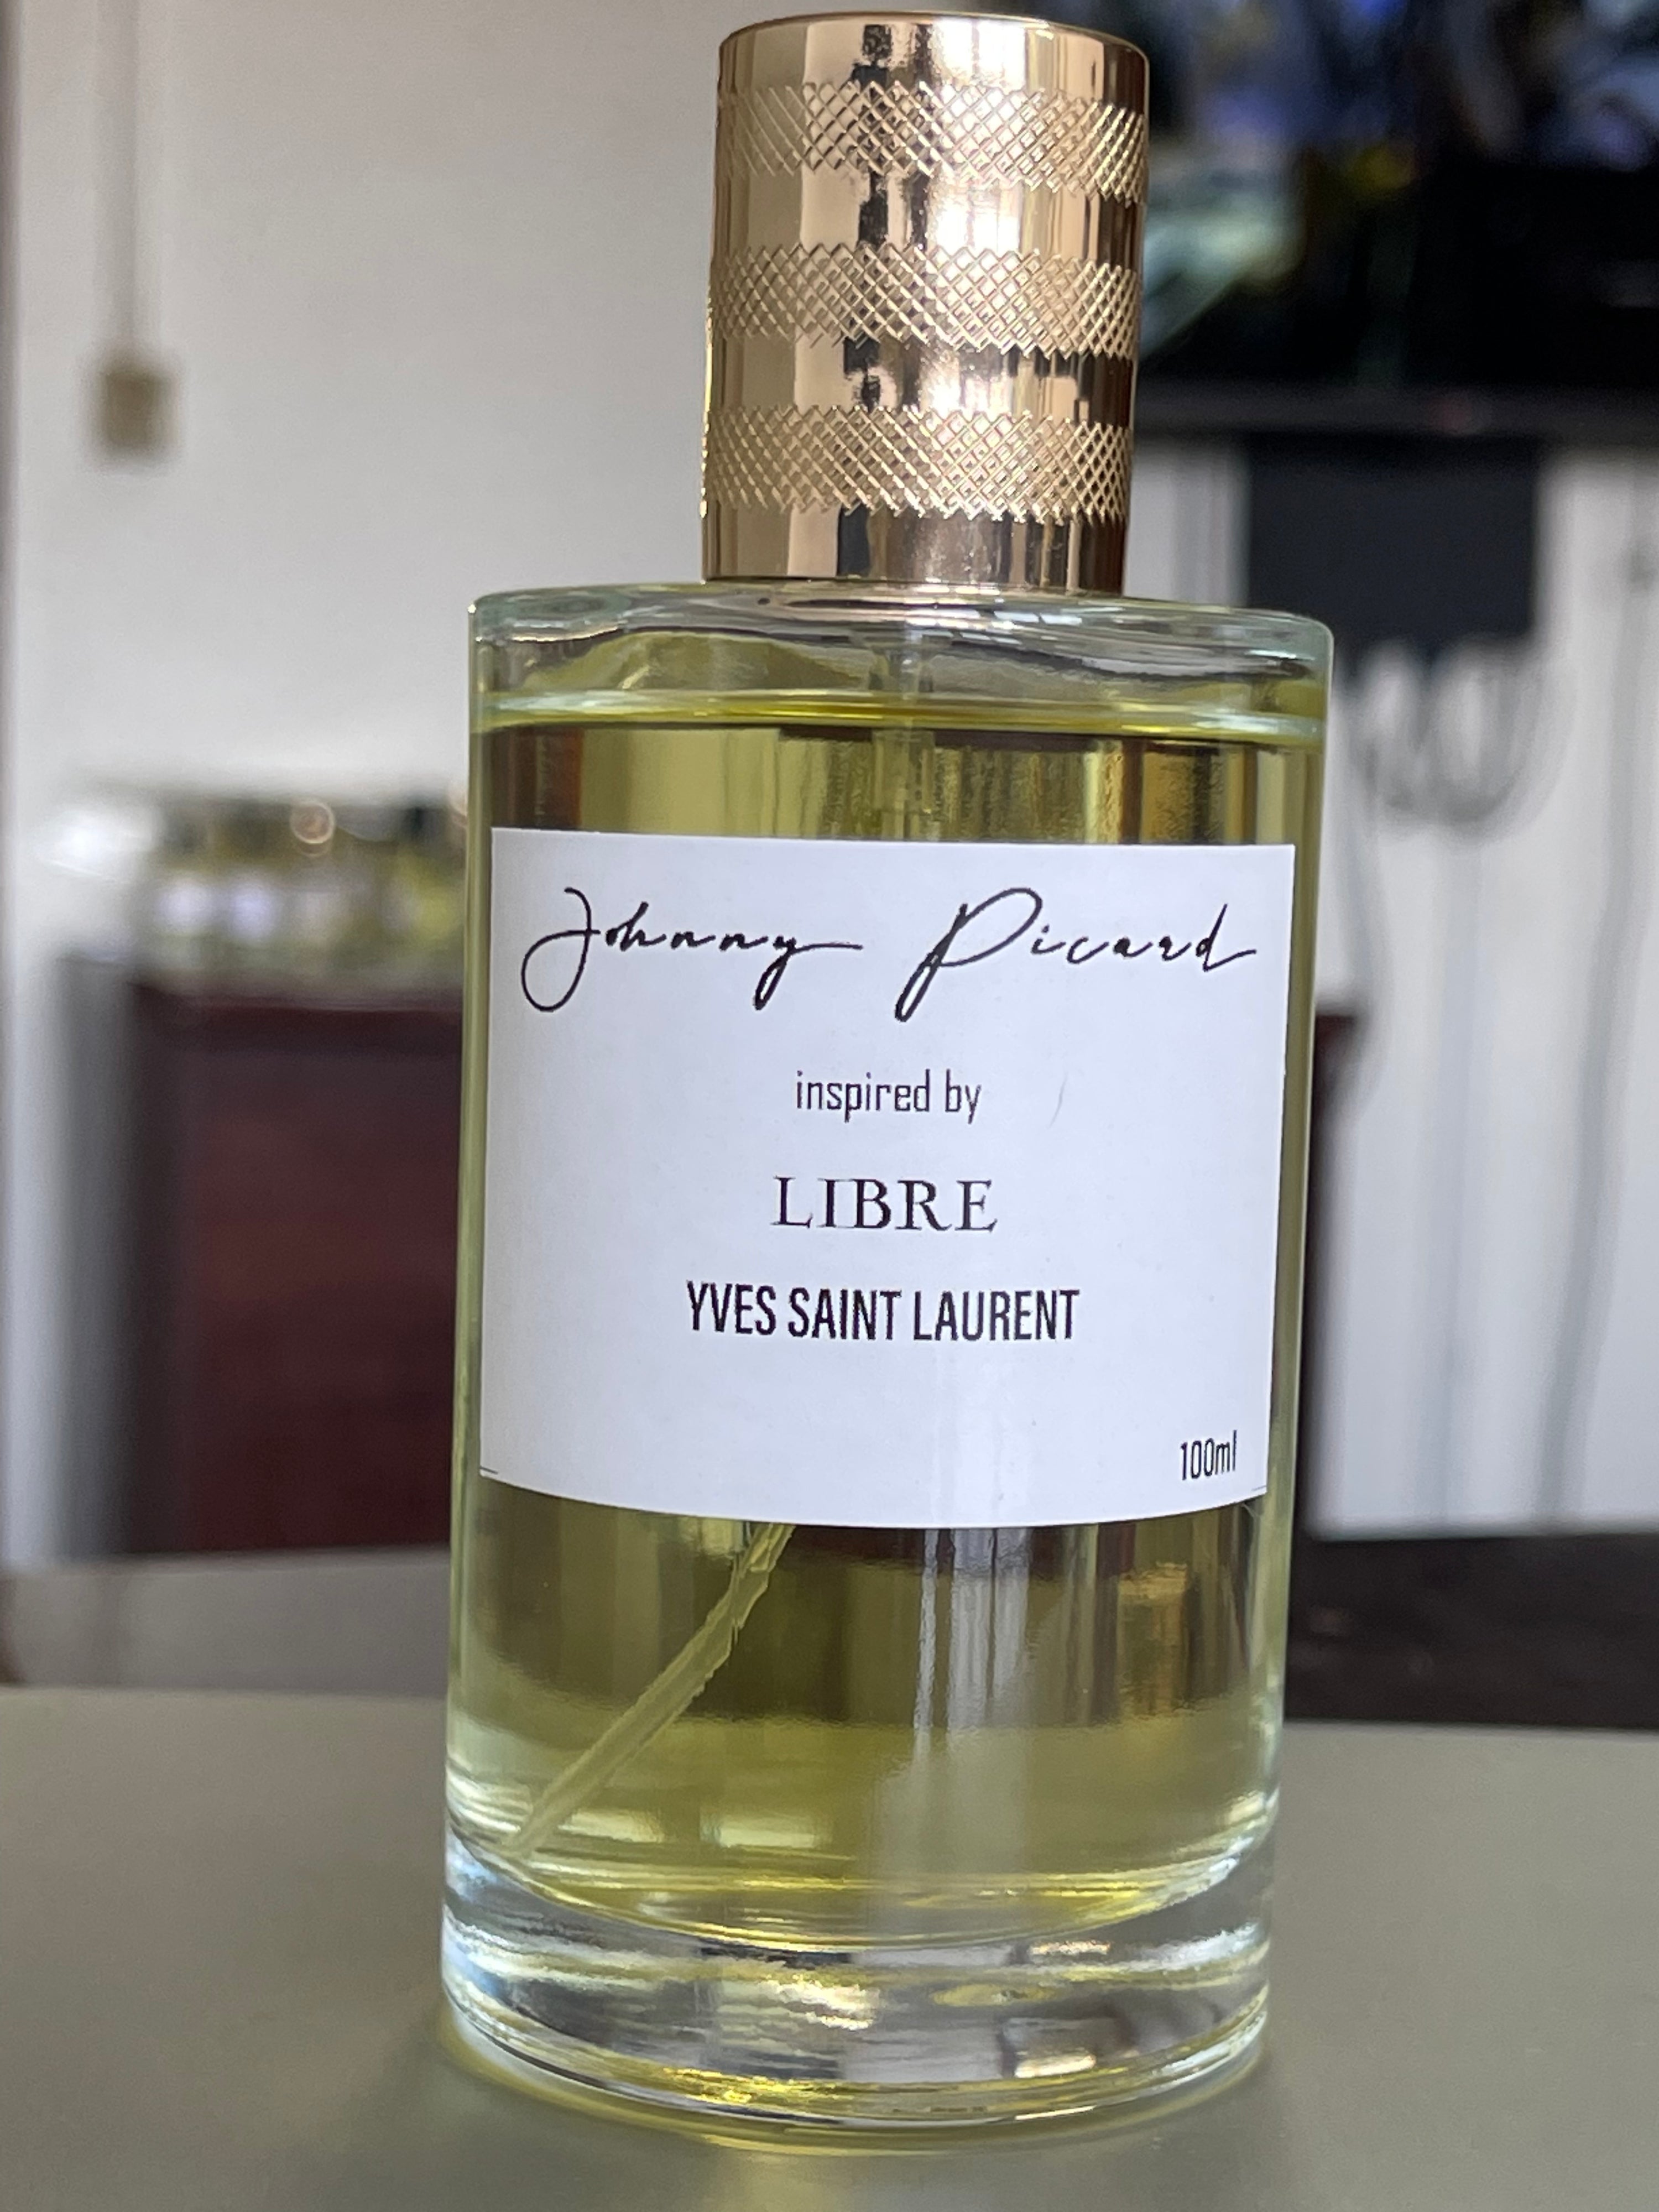 Johnny Picard inspired by Libre YVES SAINT LAURENT